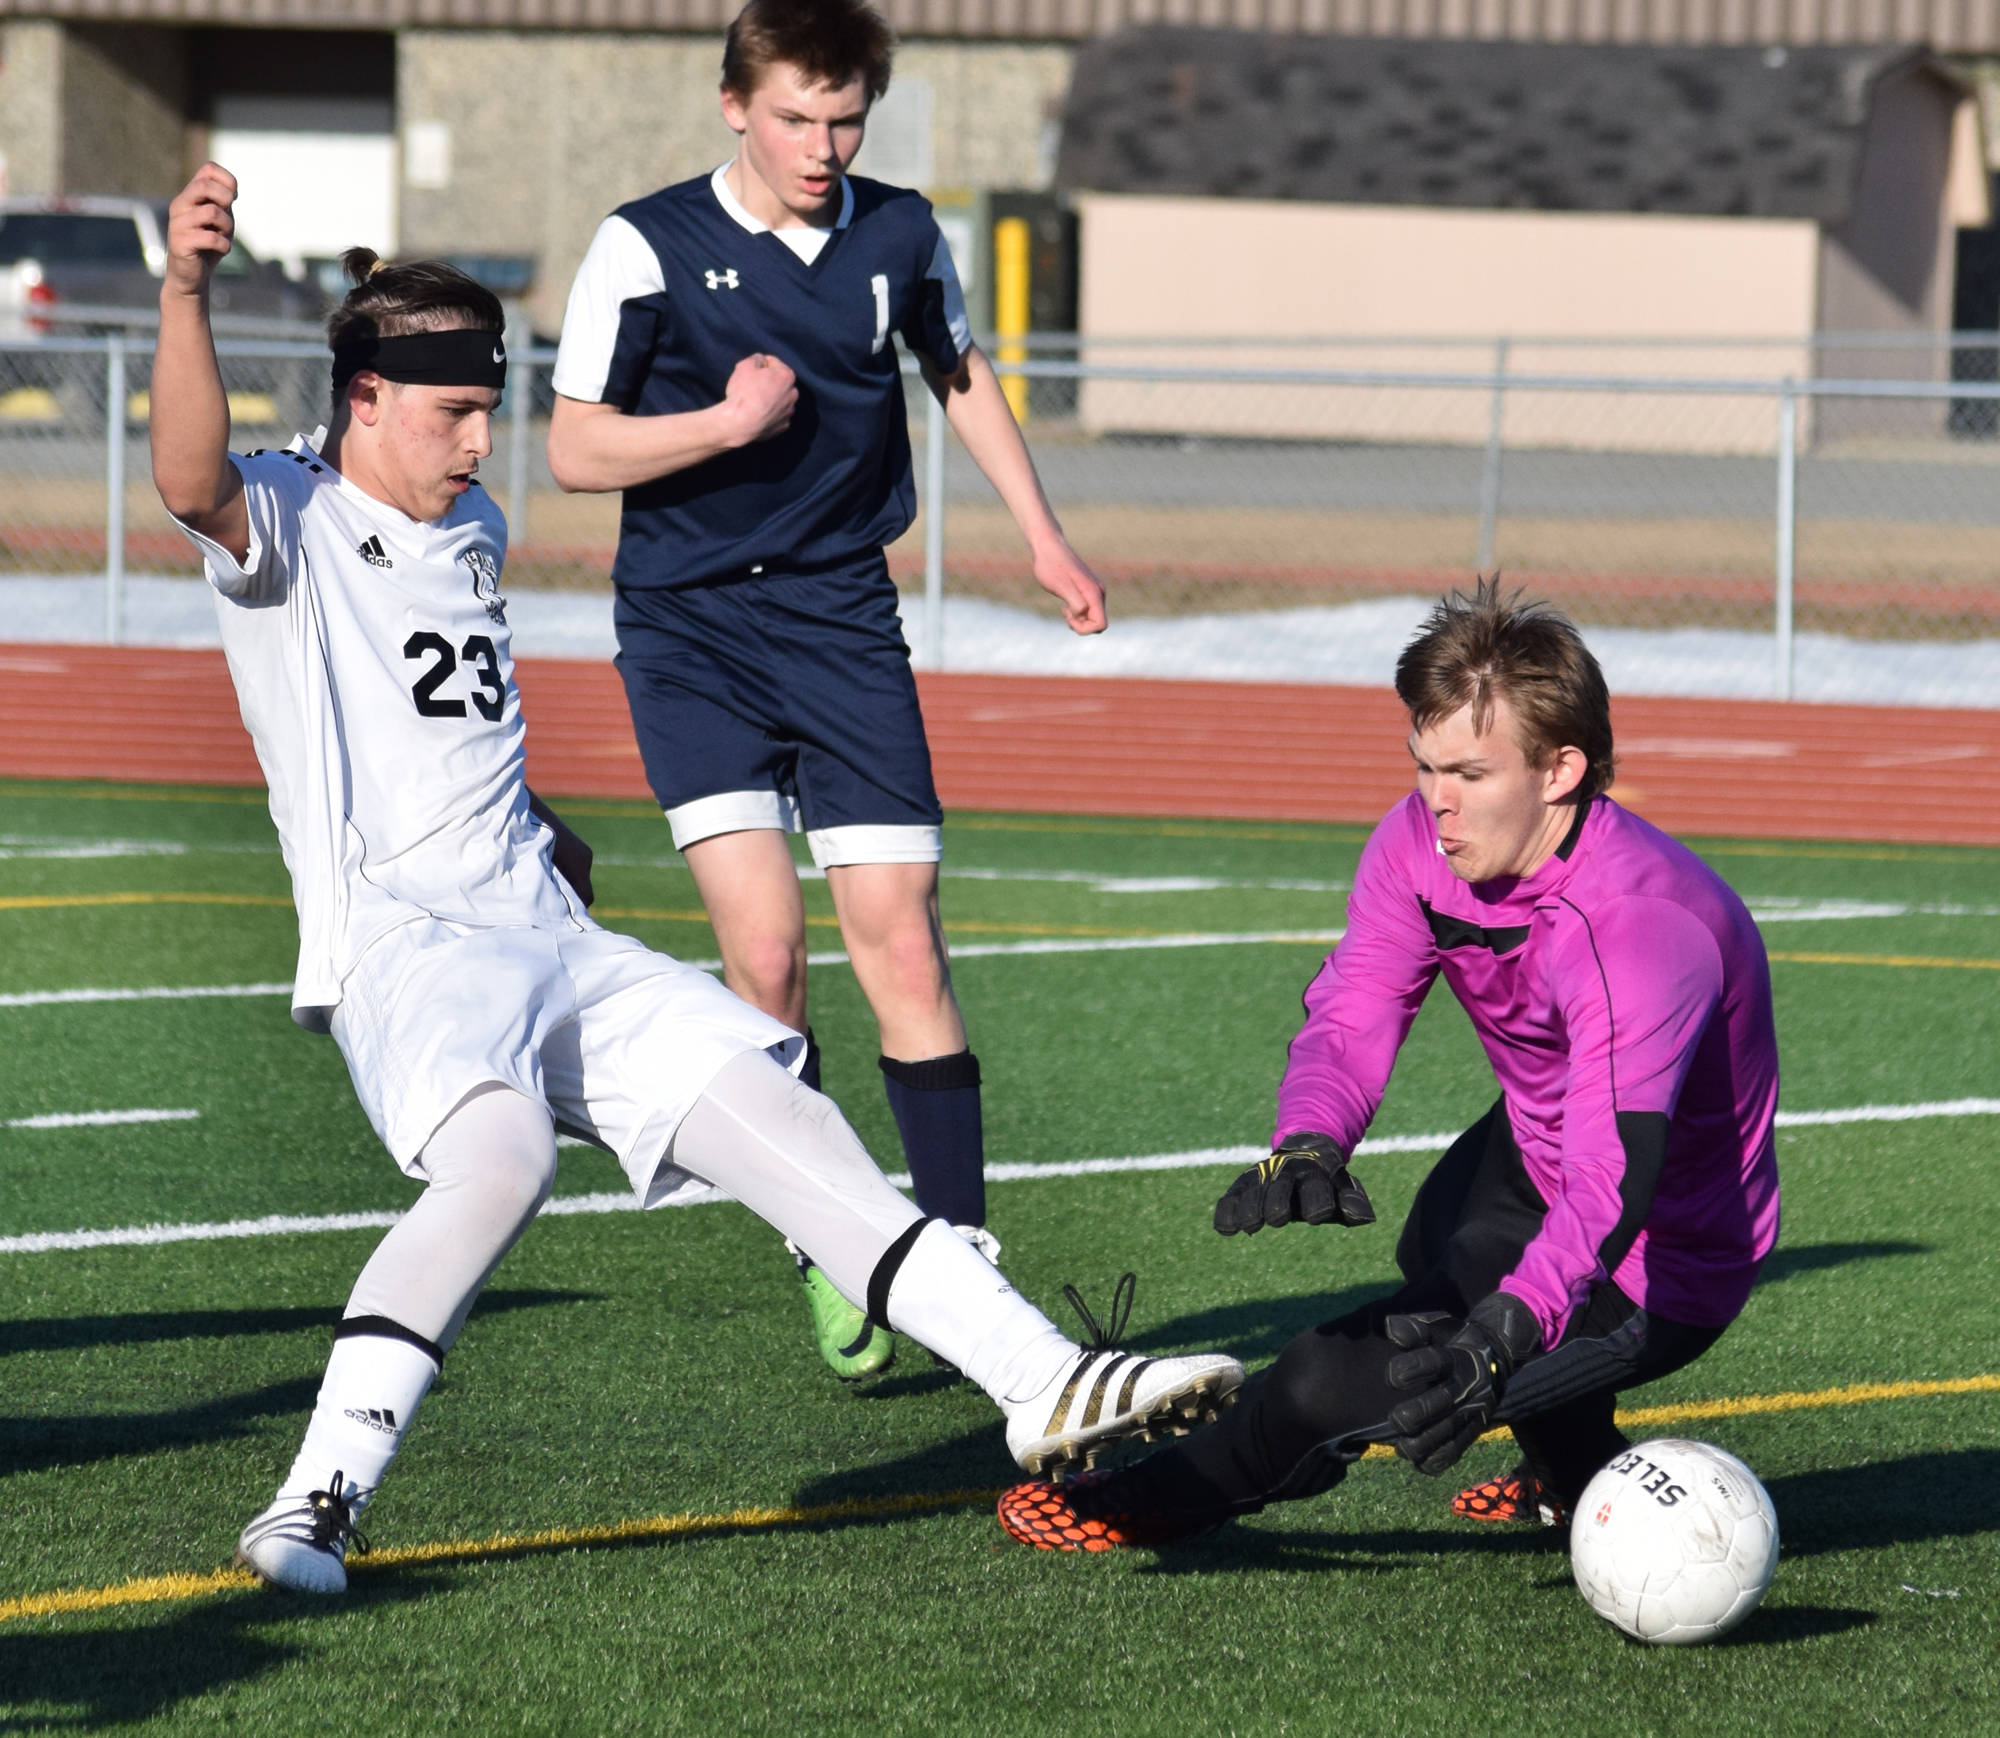 Kenai Central’s Zack Tuttle slots a goal past Soldotna goalkeeper Chase Miller in Tuesday’s conference game at Ed Hollier Field in Kenai. (Photo by Joey Klecka/Peninsula Clarion)